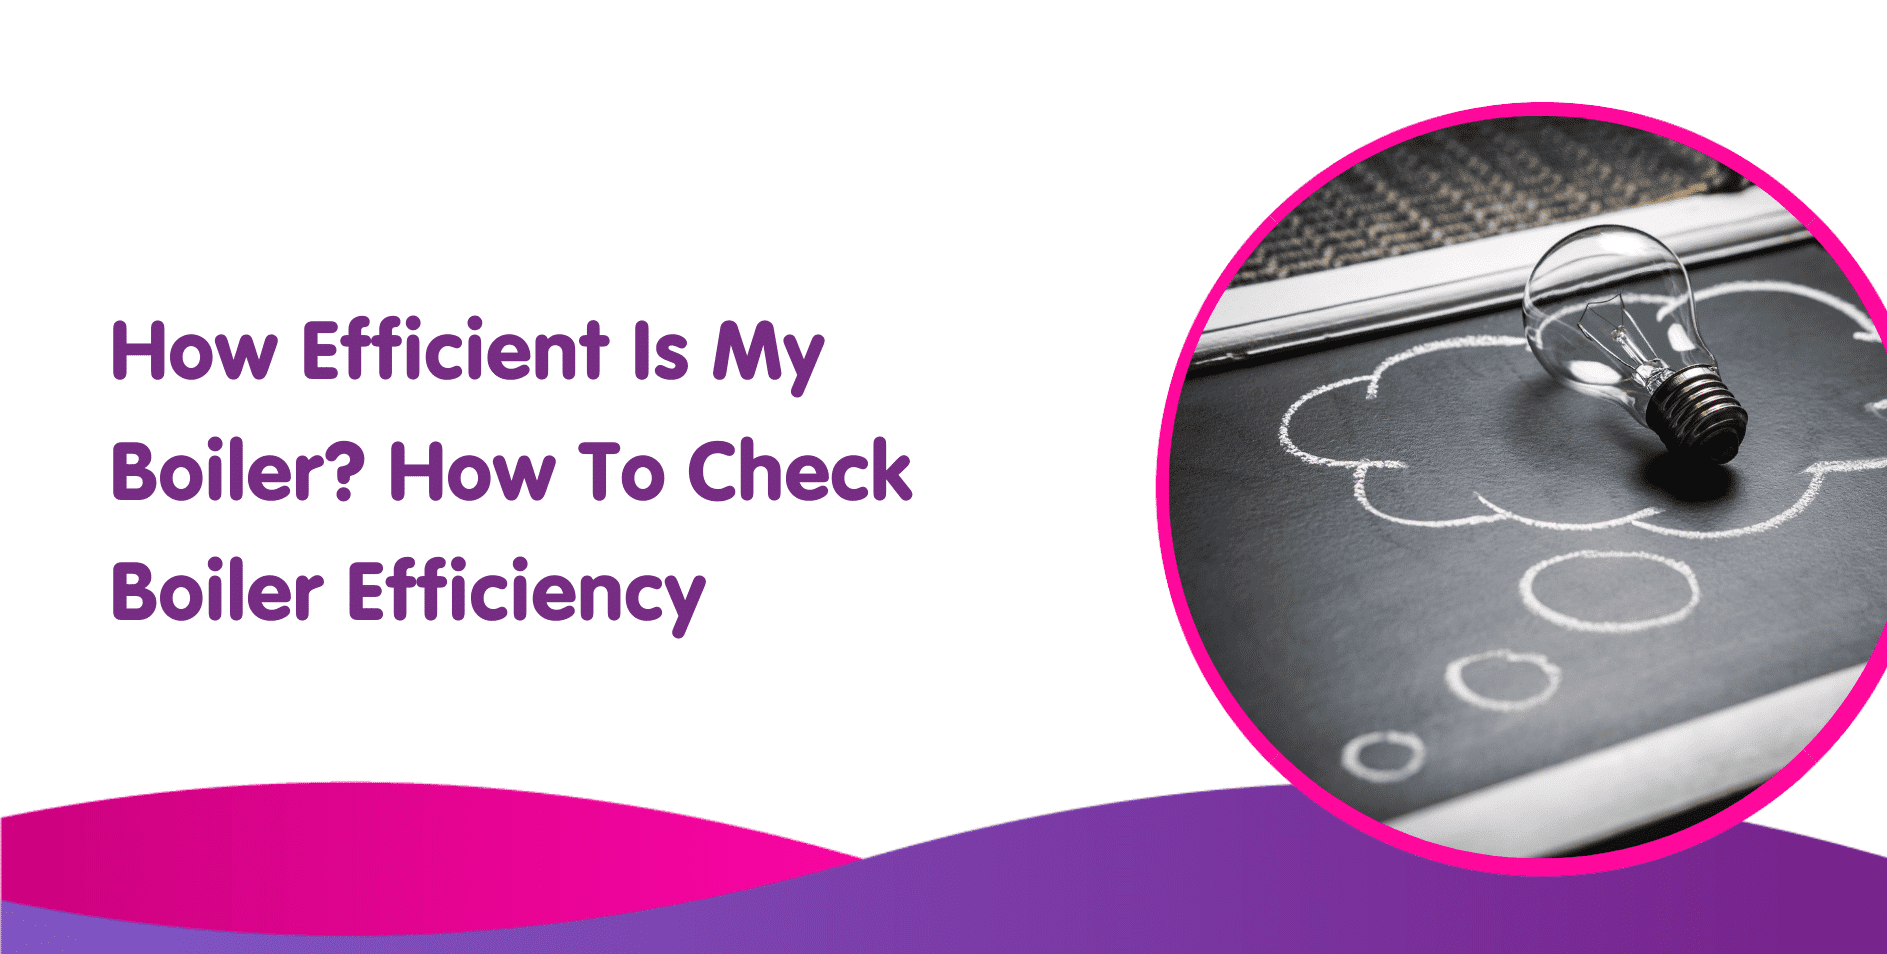 How Efficient Is My Boiler? How To Check Boiler Efficiency